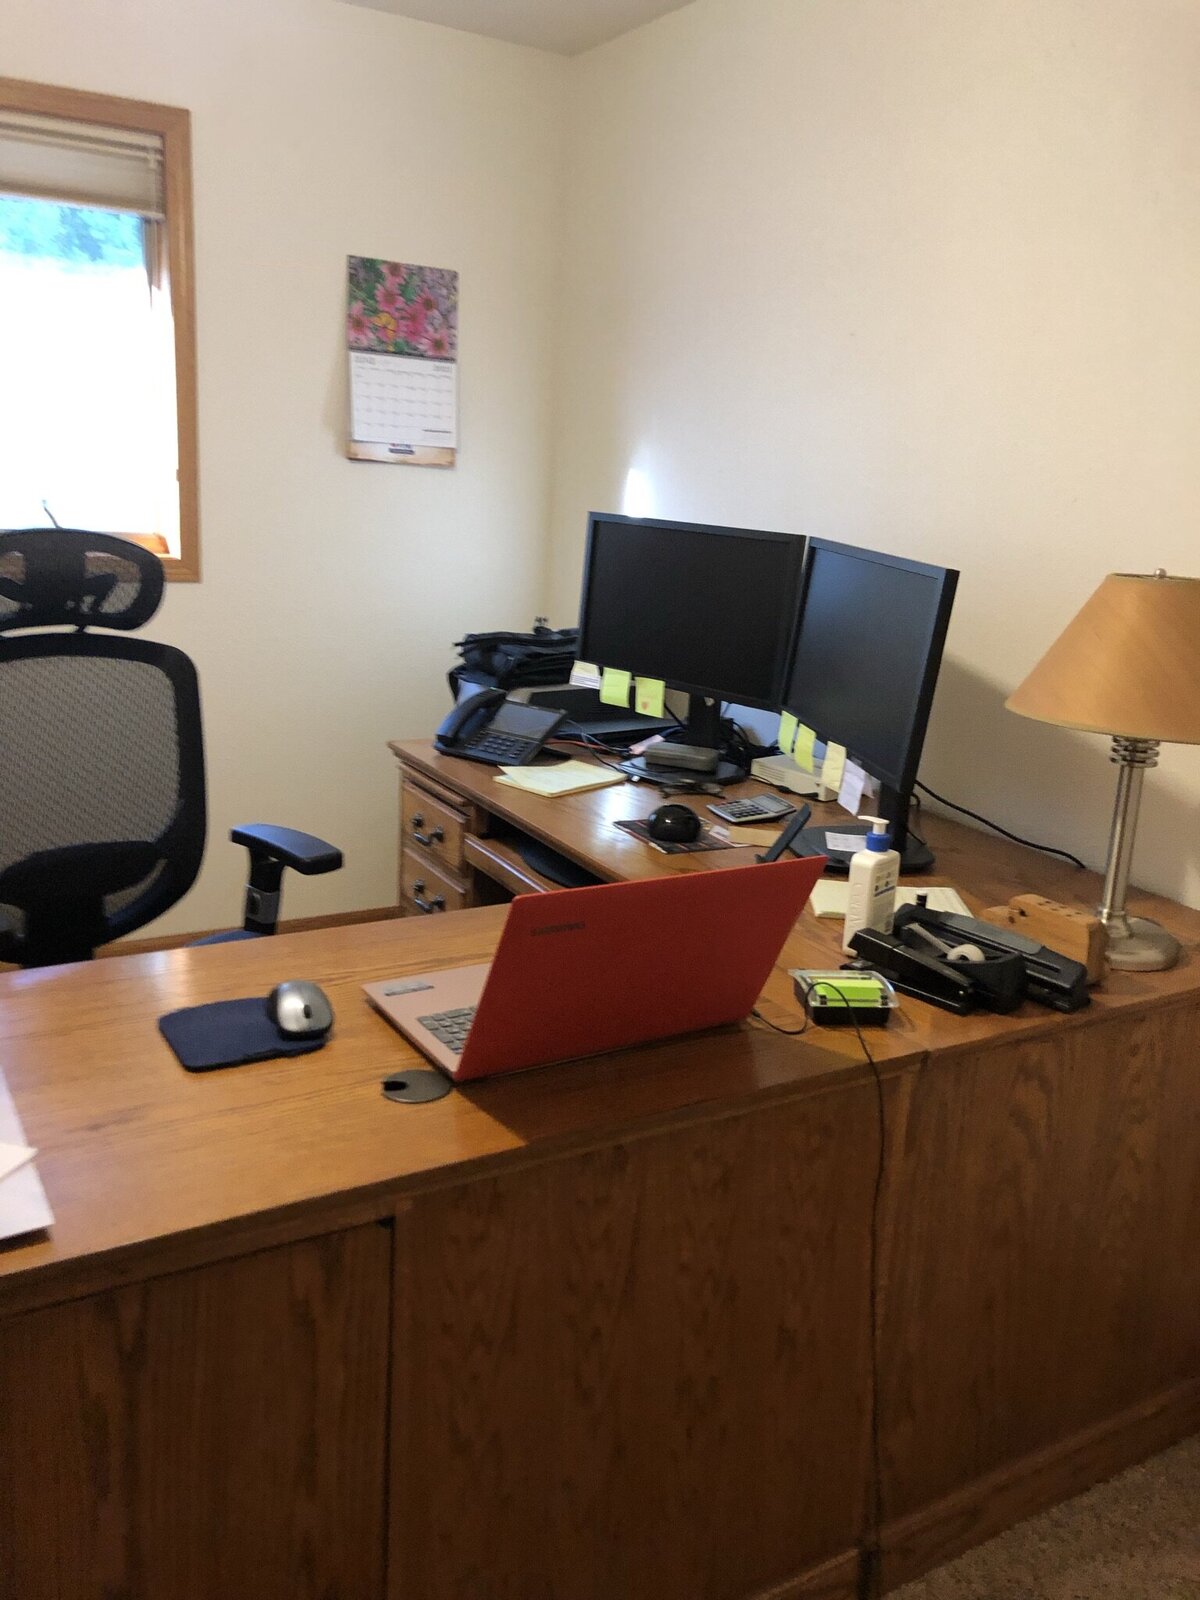 A large bulky corner office desk sits in a plain room